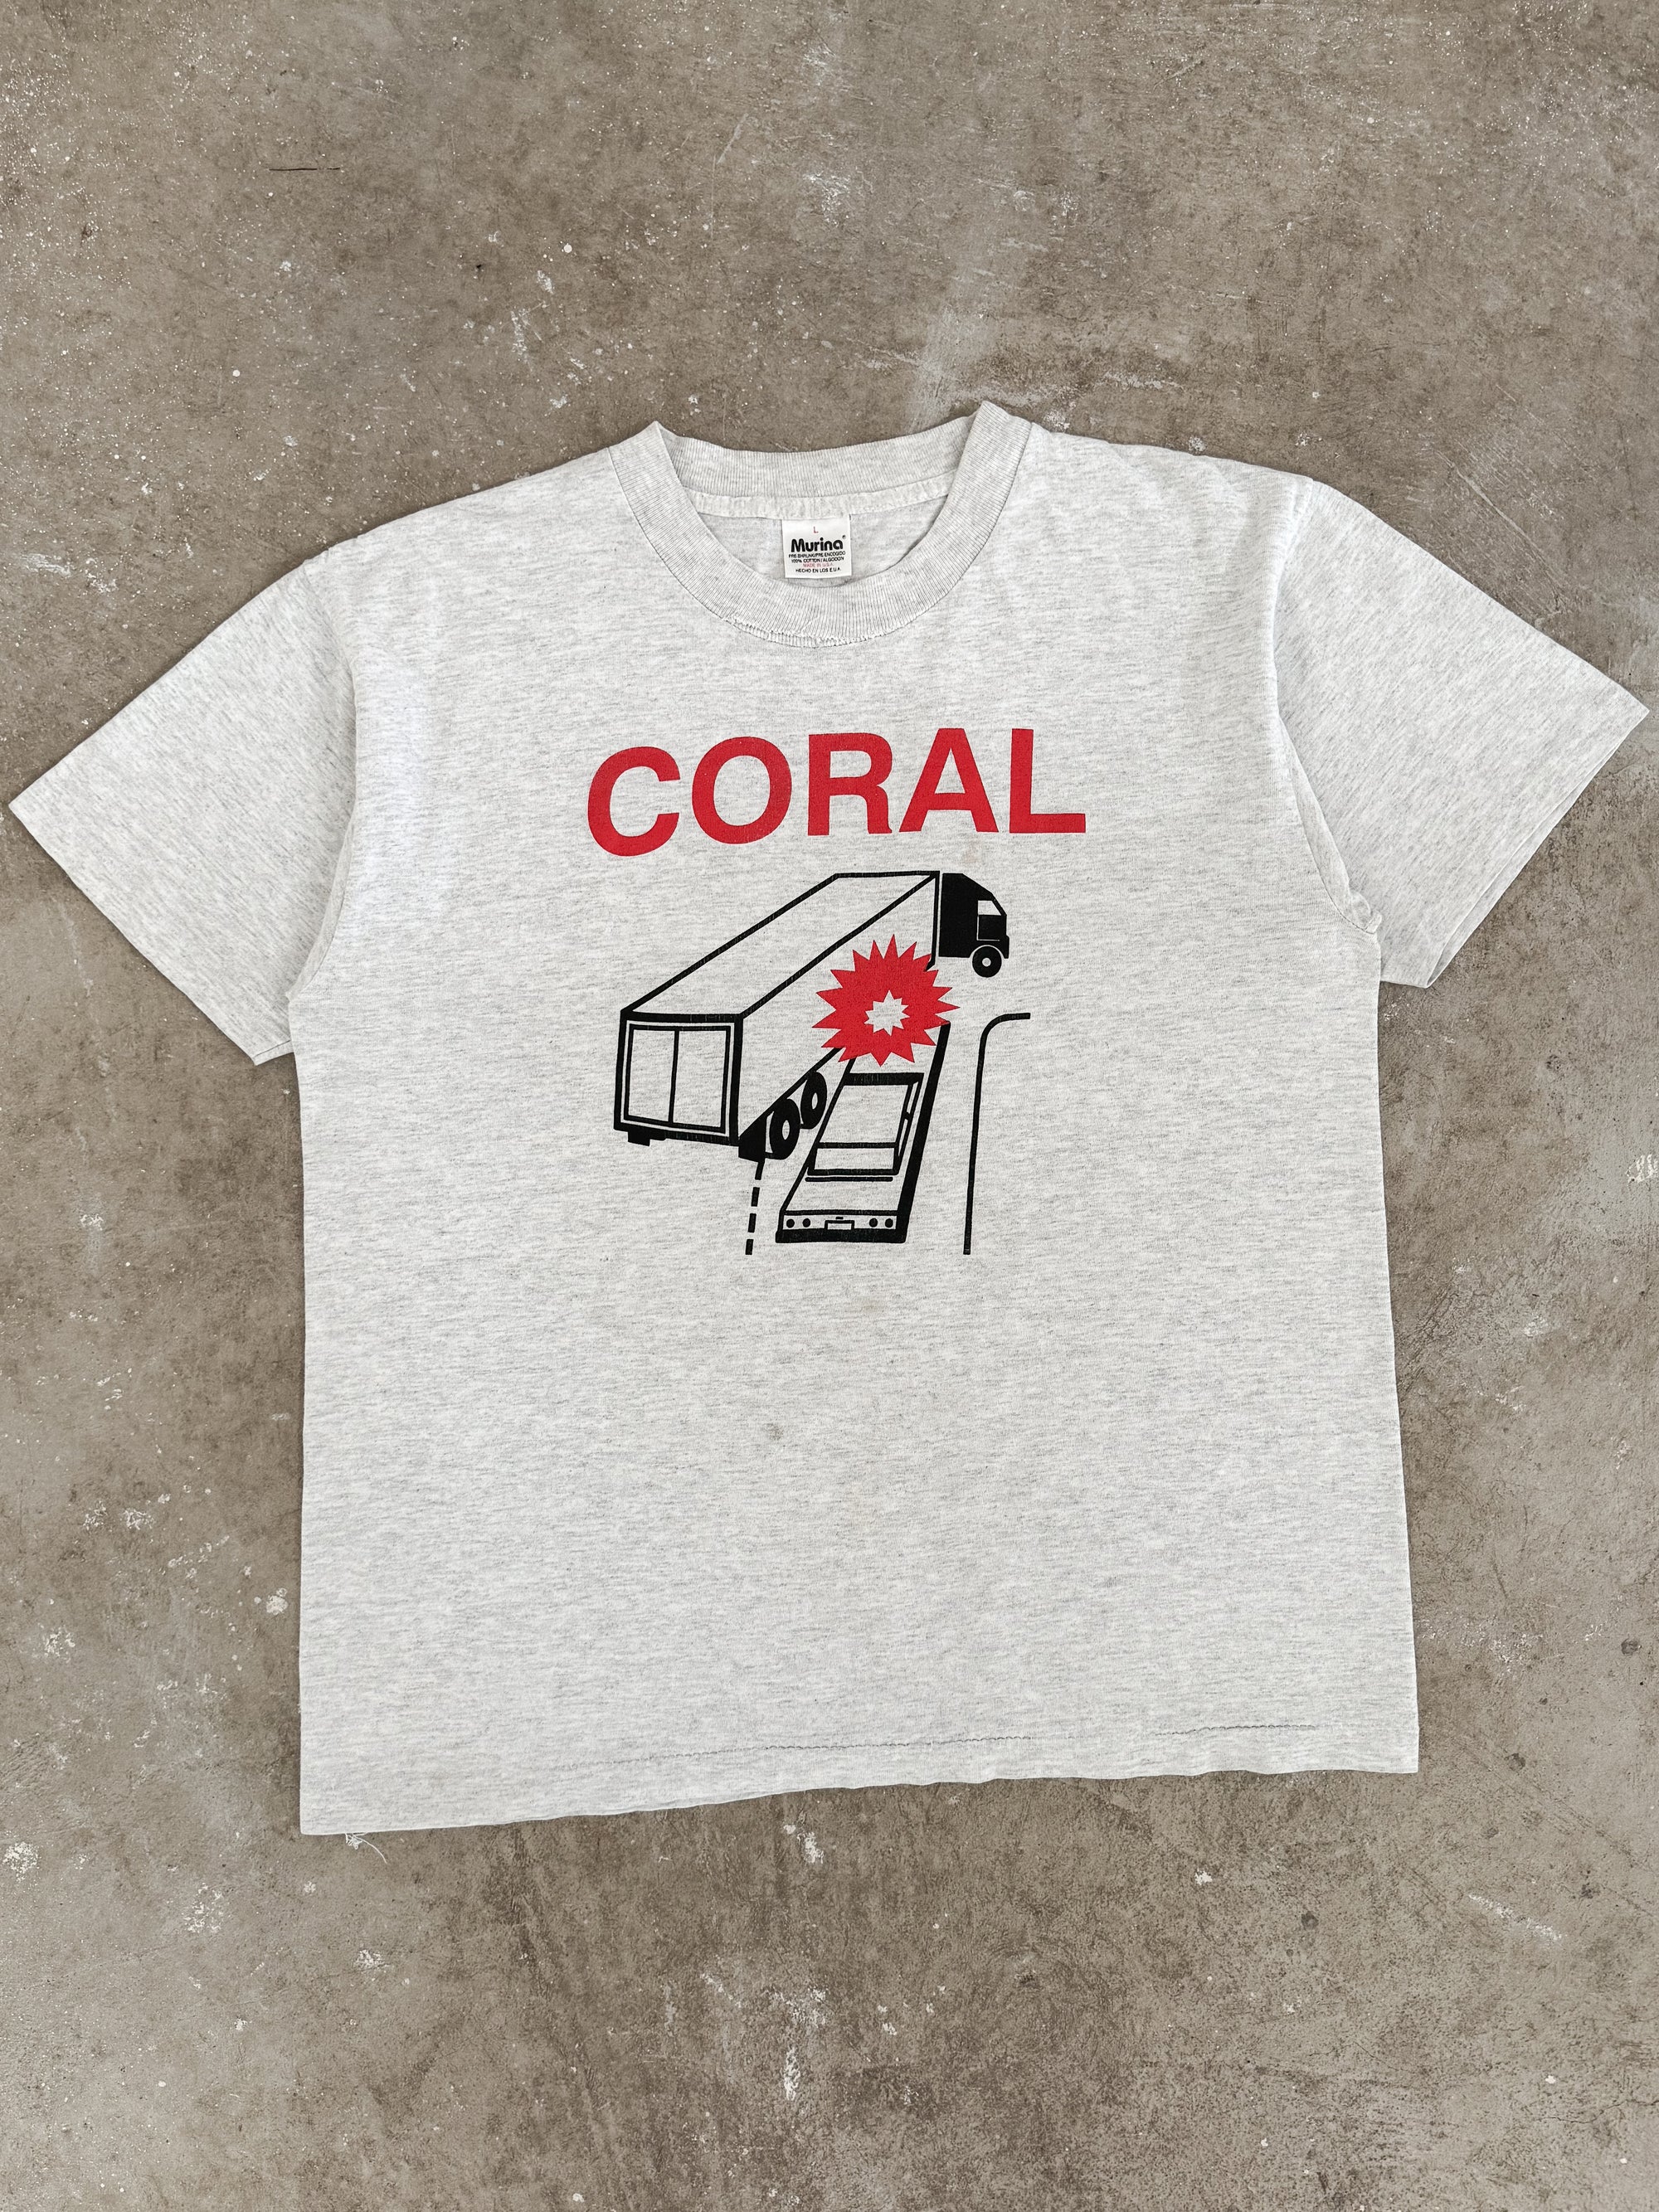 1990s "Coral" Tee (L)